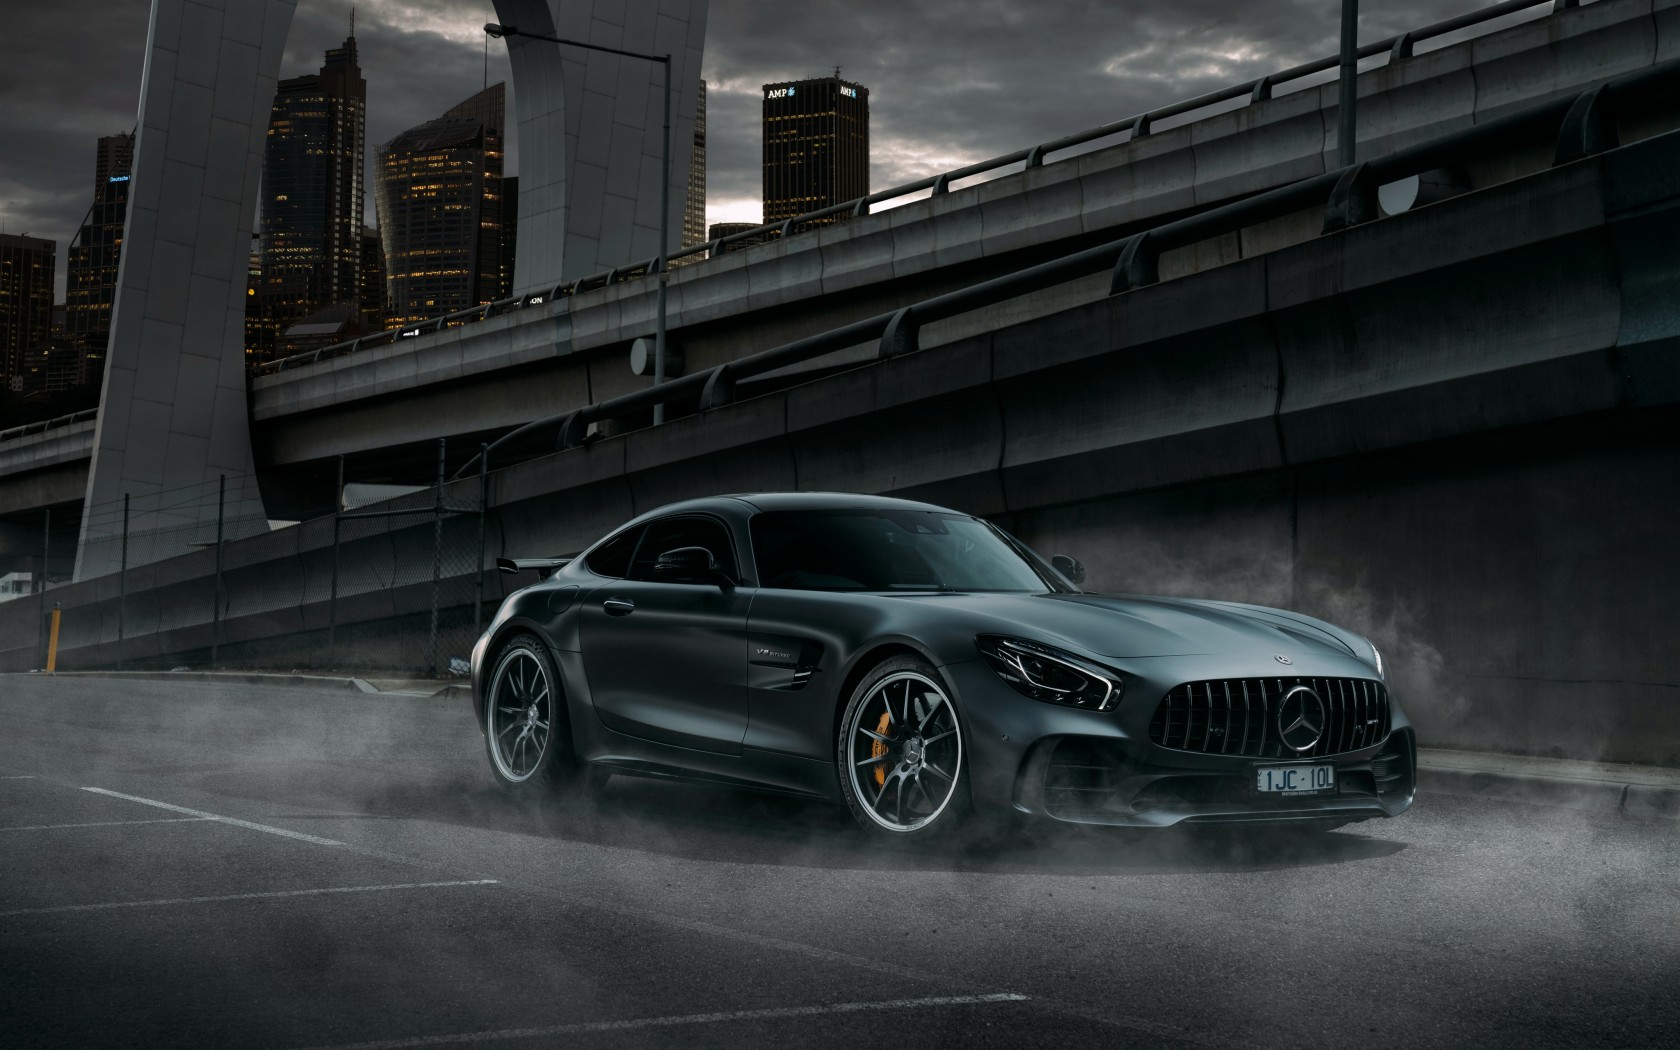 Free Download Mercedes Amg Gt And Benz Car Wallpaper for Desktop and Mobiles 1680x1050